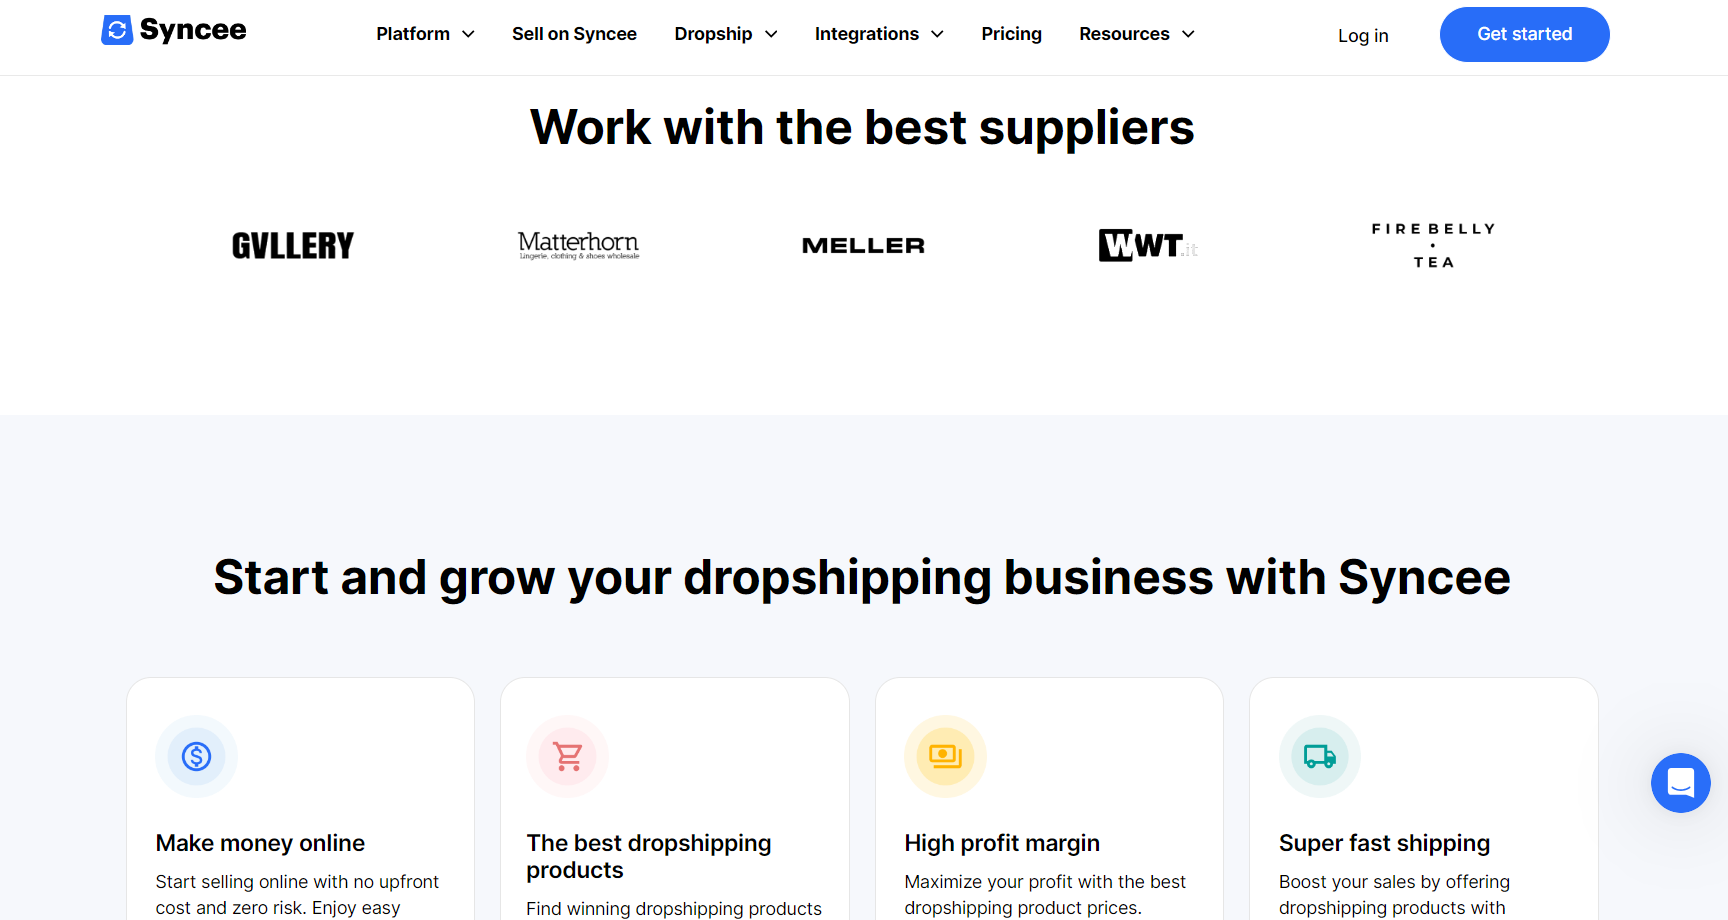 Syncee Dropshipping Review: Who Syncee Dropshipping Is Best For